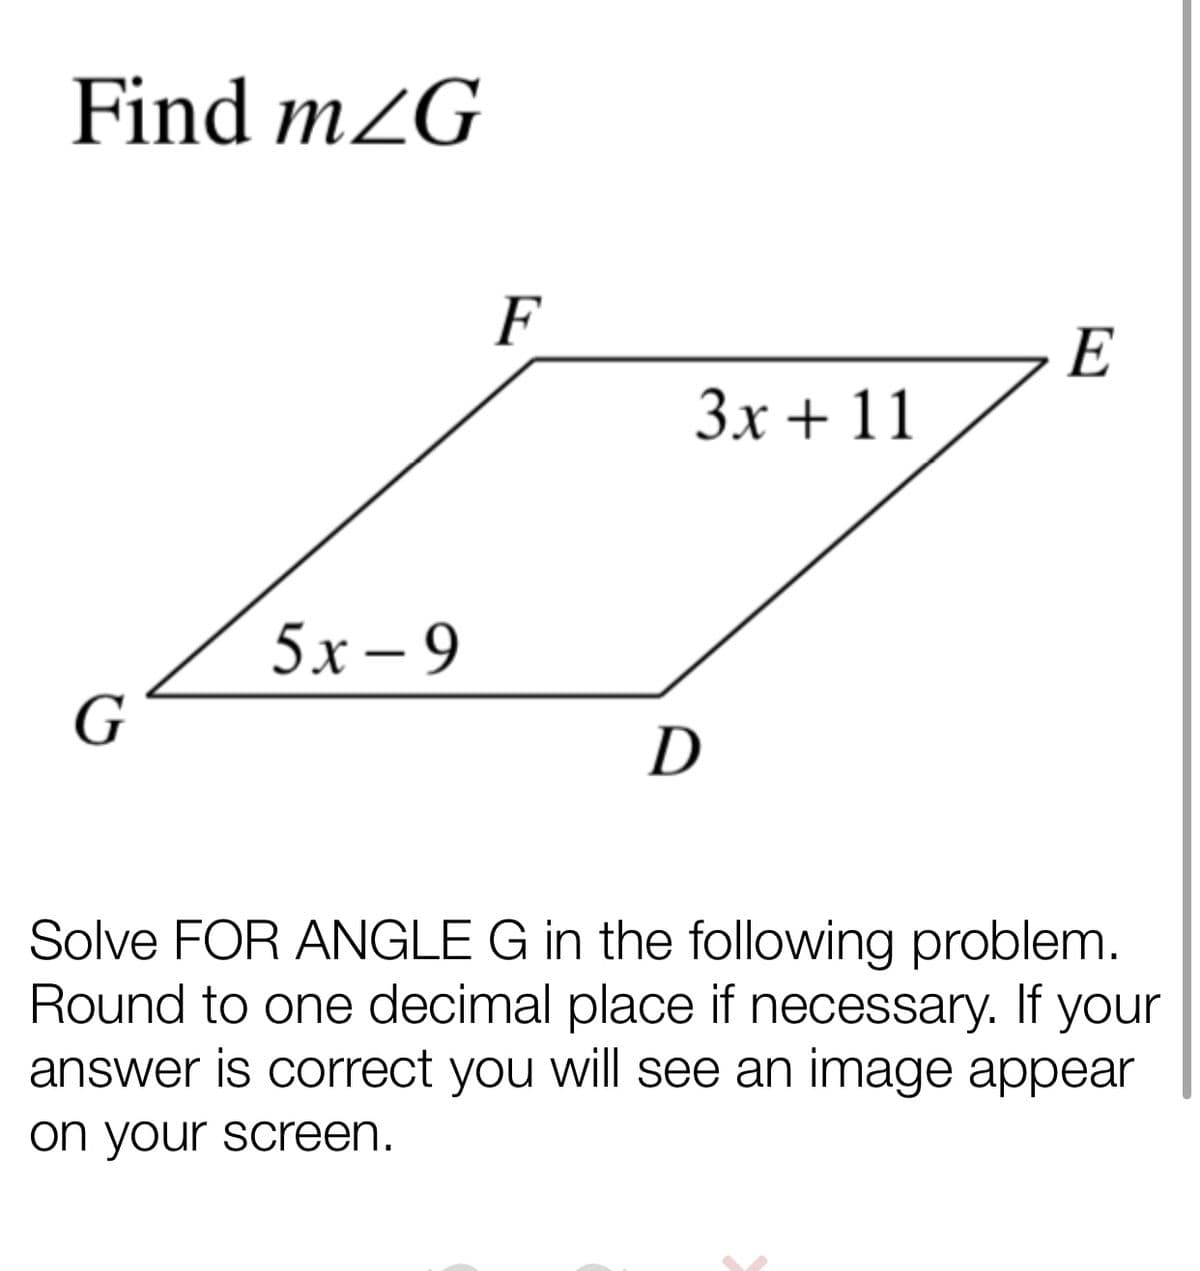 Find m2G
F
E
3x + 11
5х-9
G
D
Solve FOR ANGLE G in the following problem.
Round to one decimal place if necessary. If your
answer is correct you will see an image appear
on your screen.
